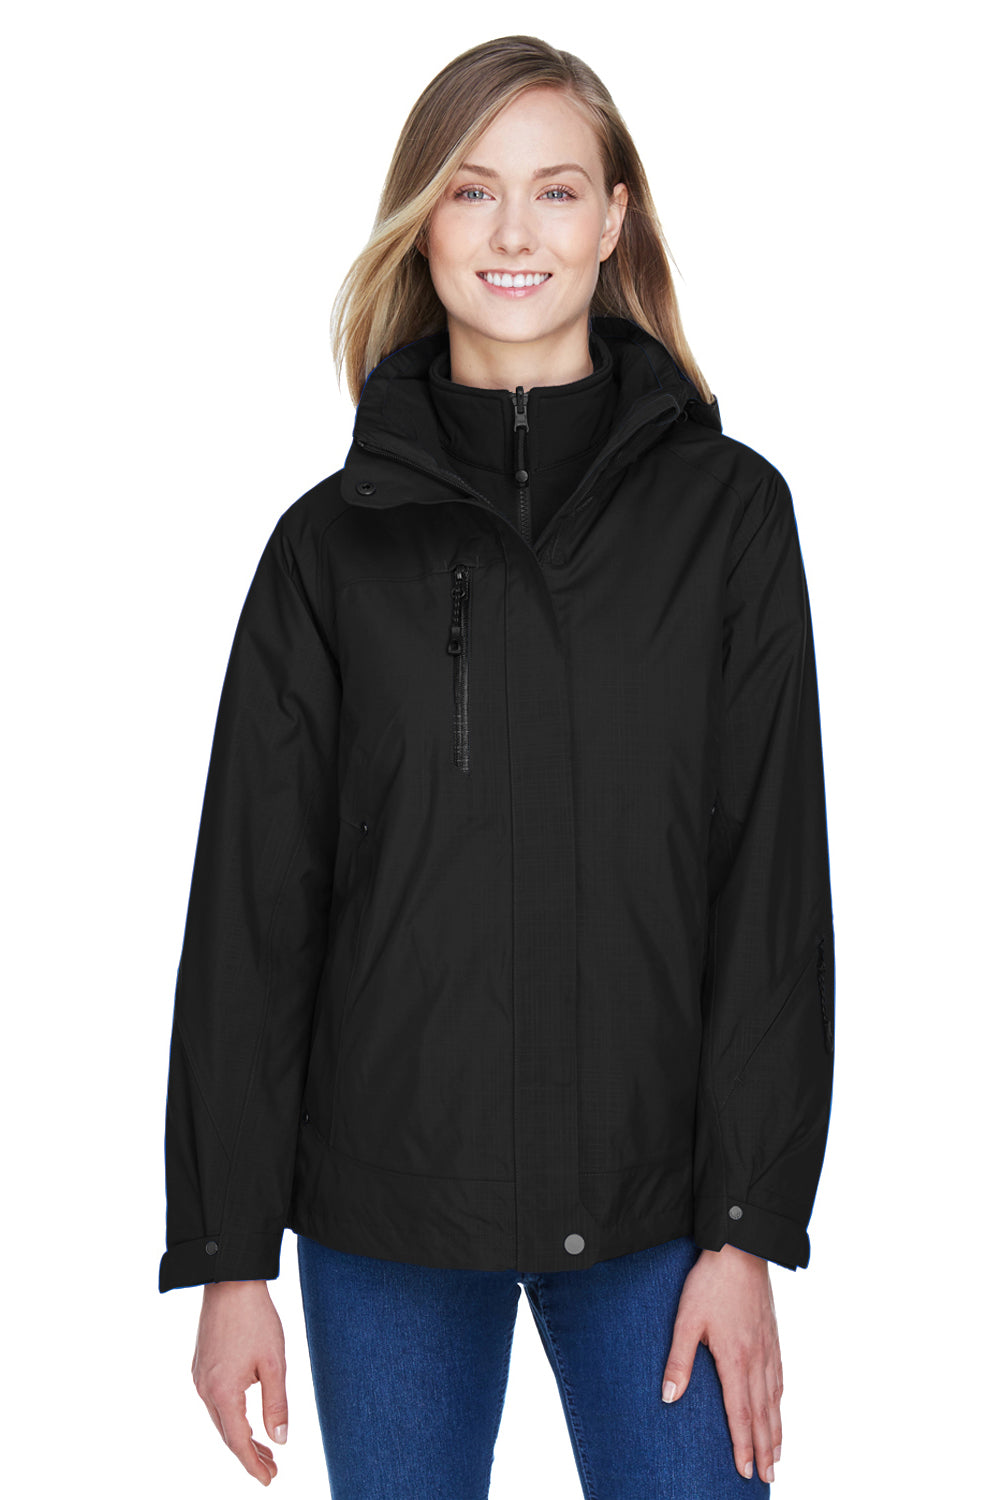 North End 78178 Womens Caprice 3-in-1 Full Zip Hooded Jacket Black Front